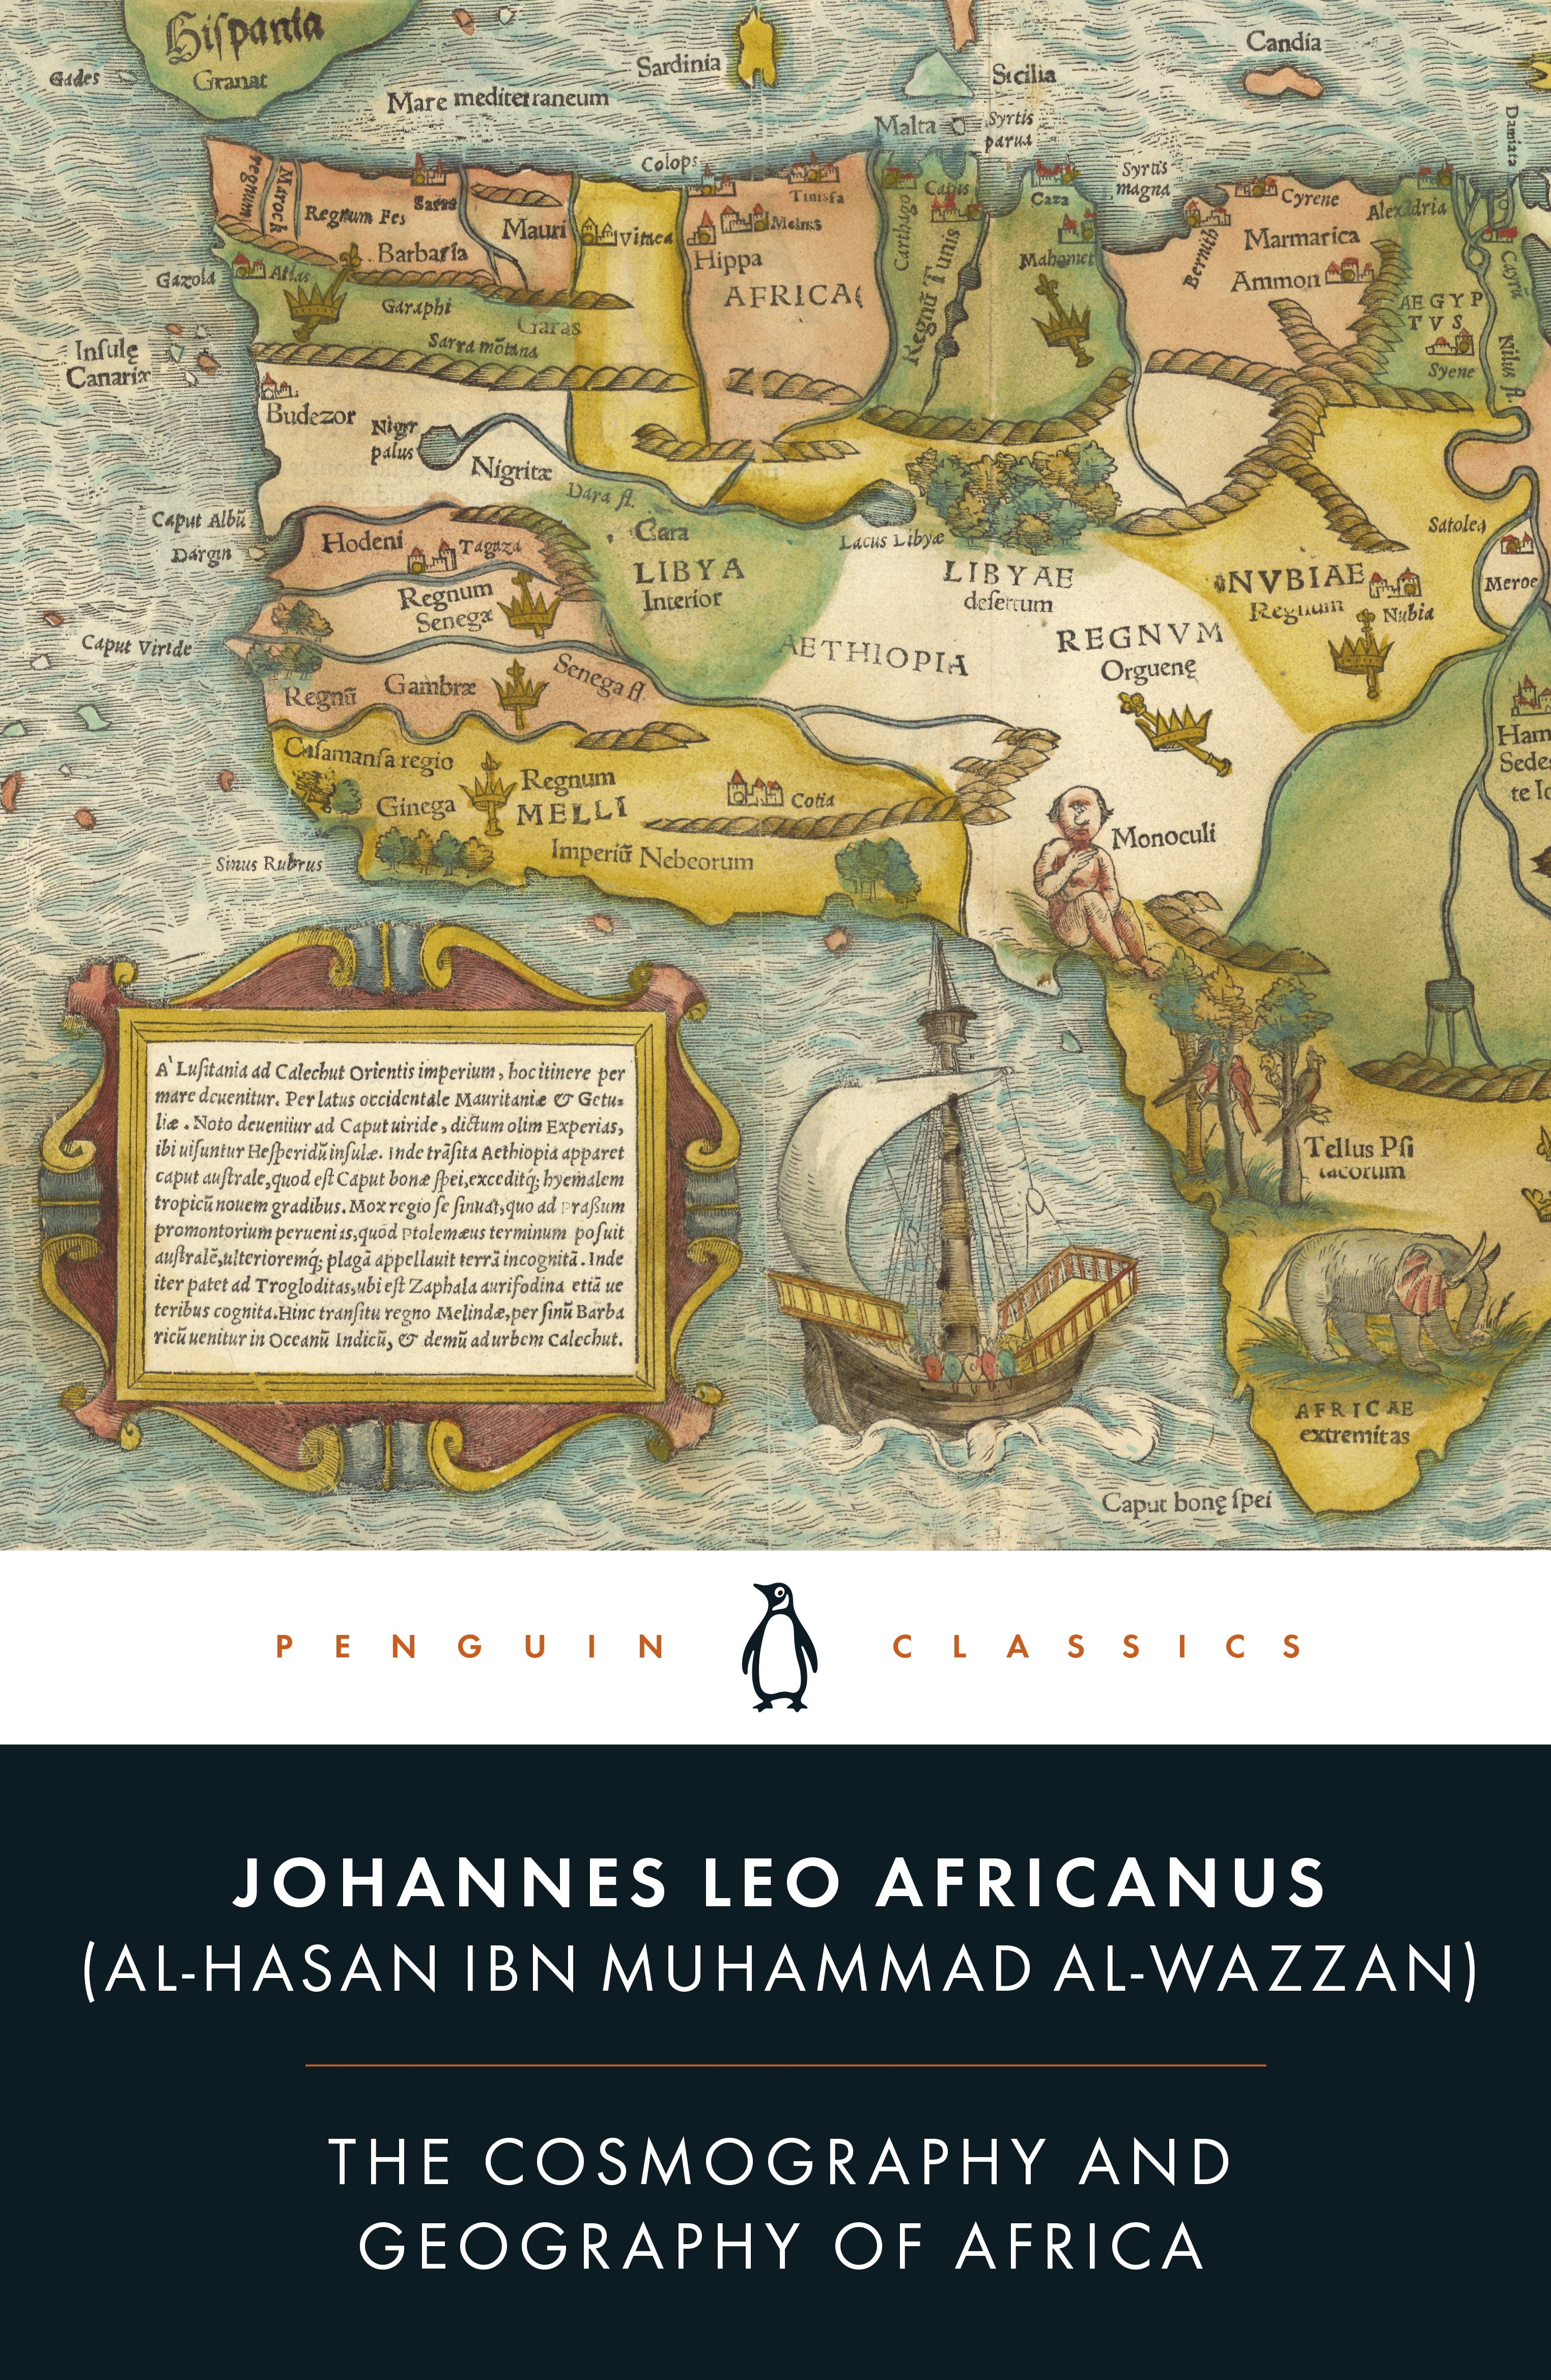 Book “The Cosmography and Geography of Africa” by Leo Africanus — March 2, 2023